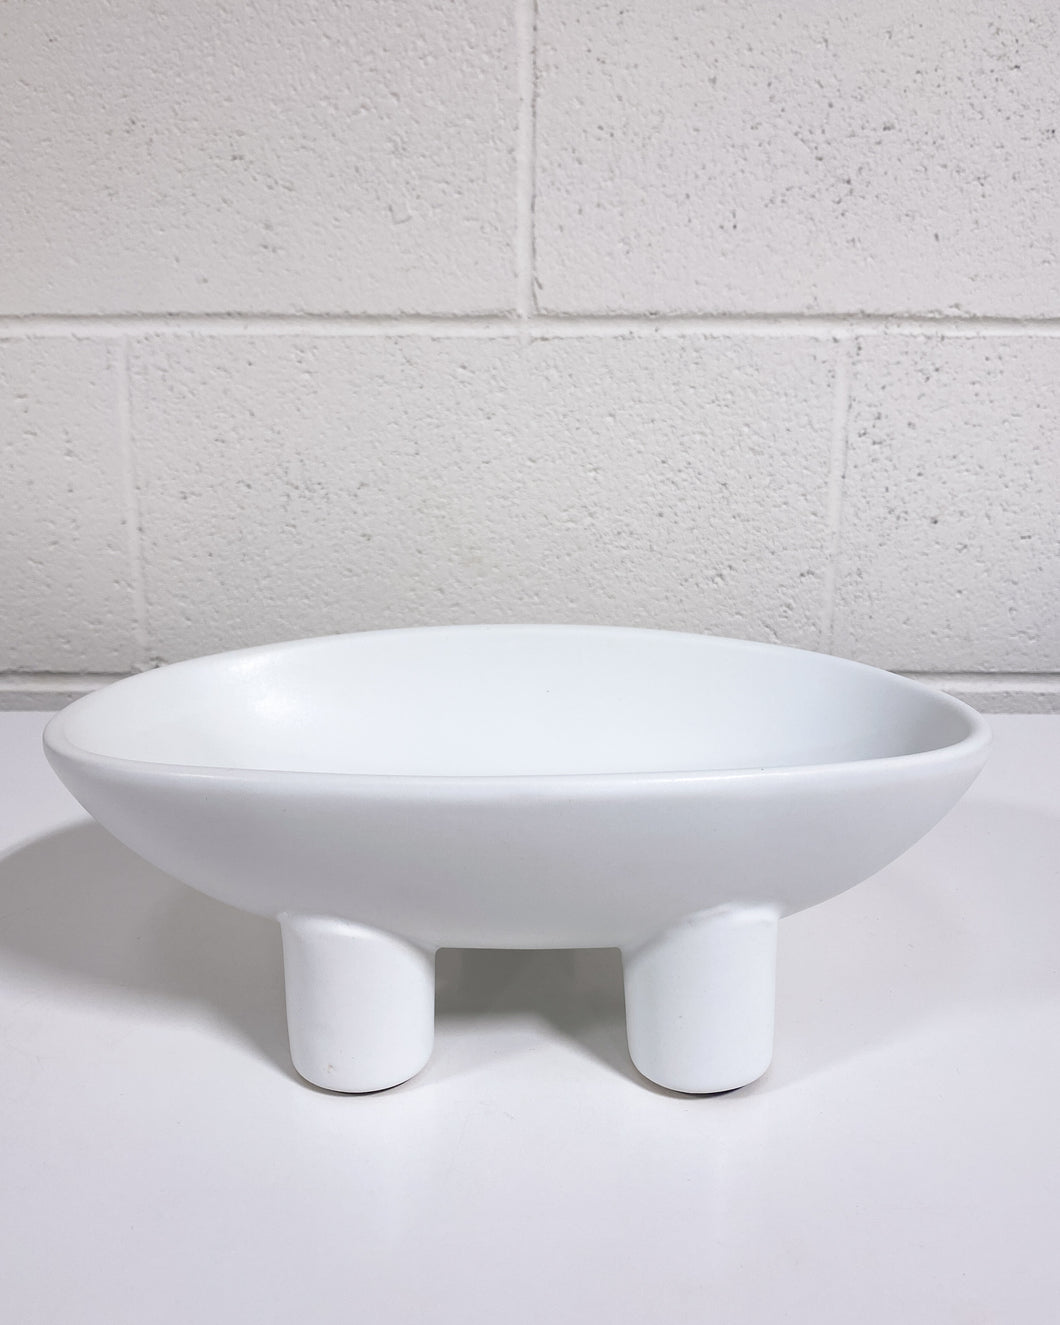 Footed Ceramic Ovular Fruit Bowl